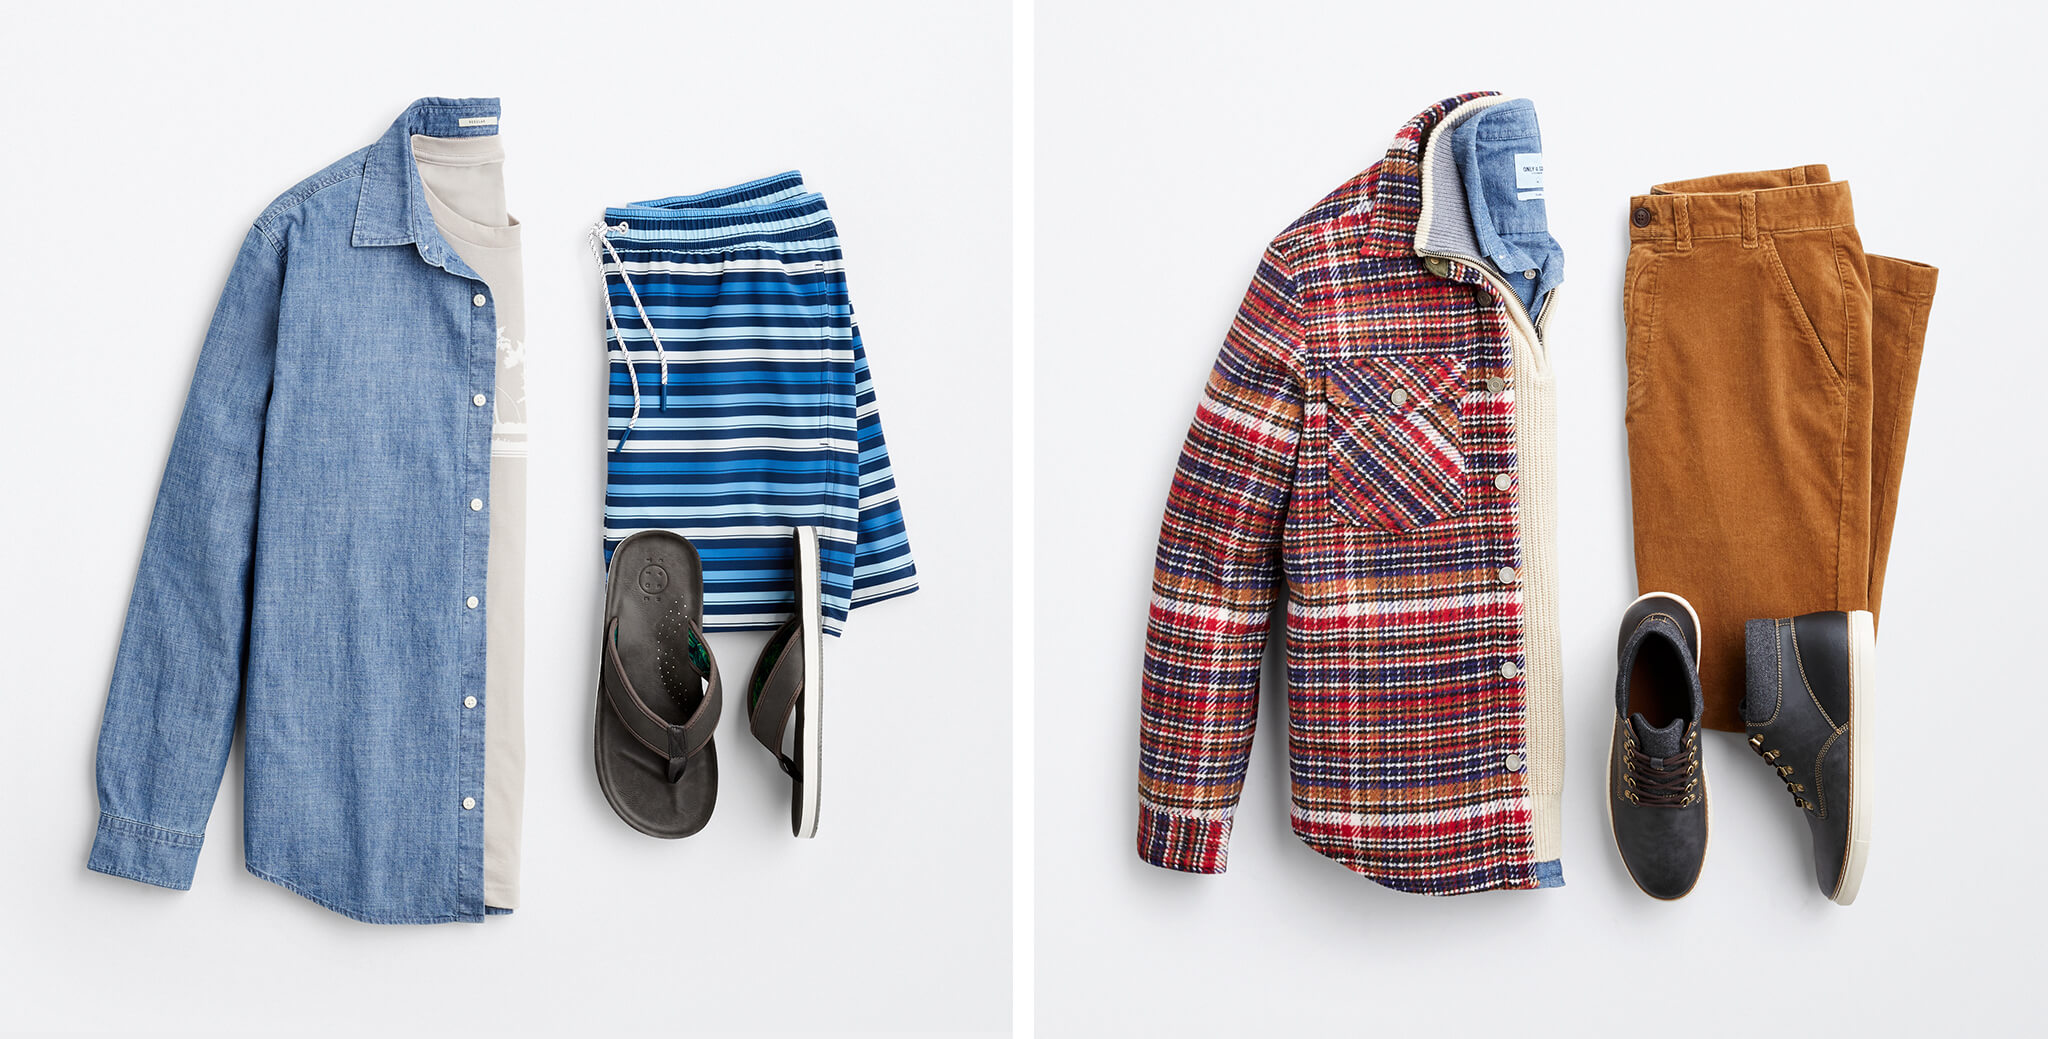 men's outfits featuring chambray shirts, t-shirts, and sweaters